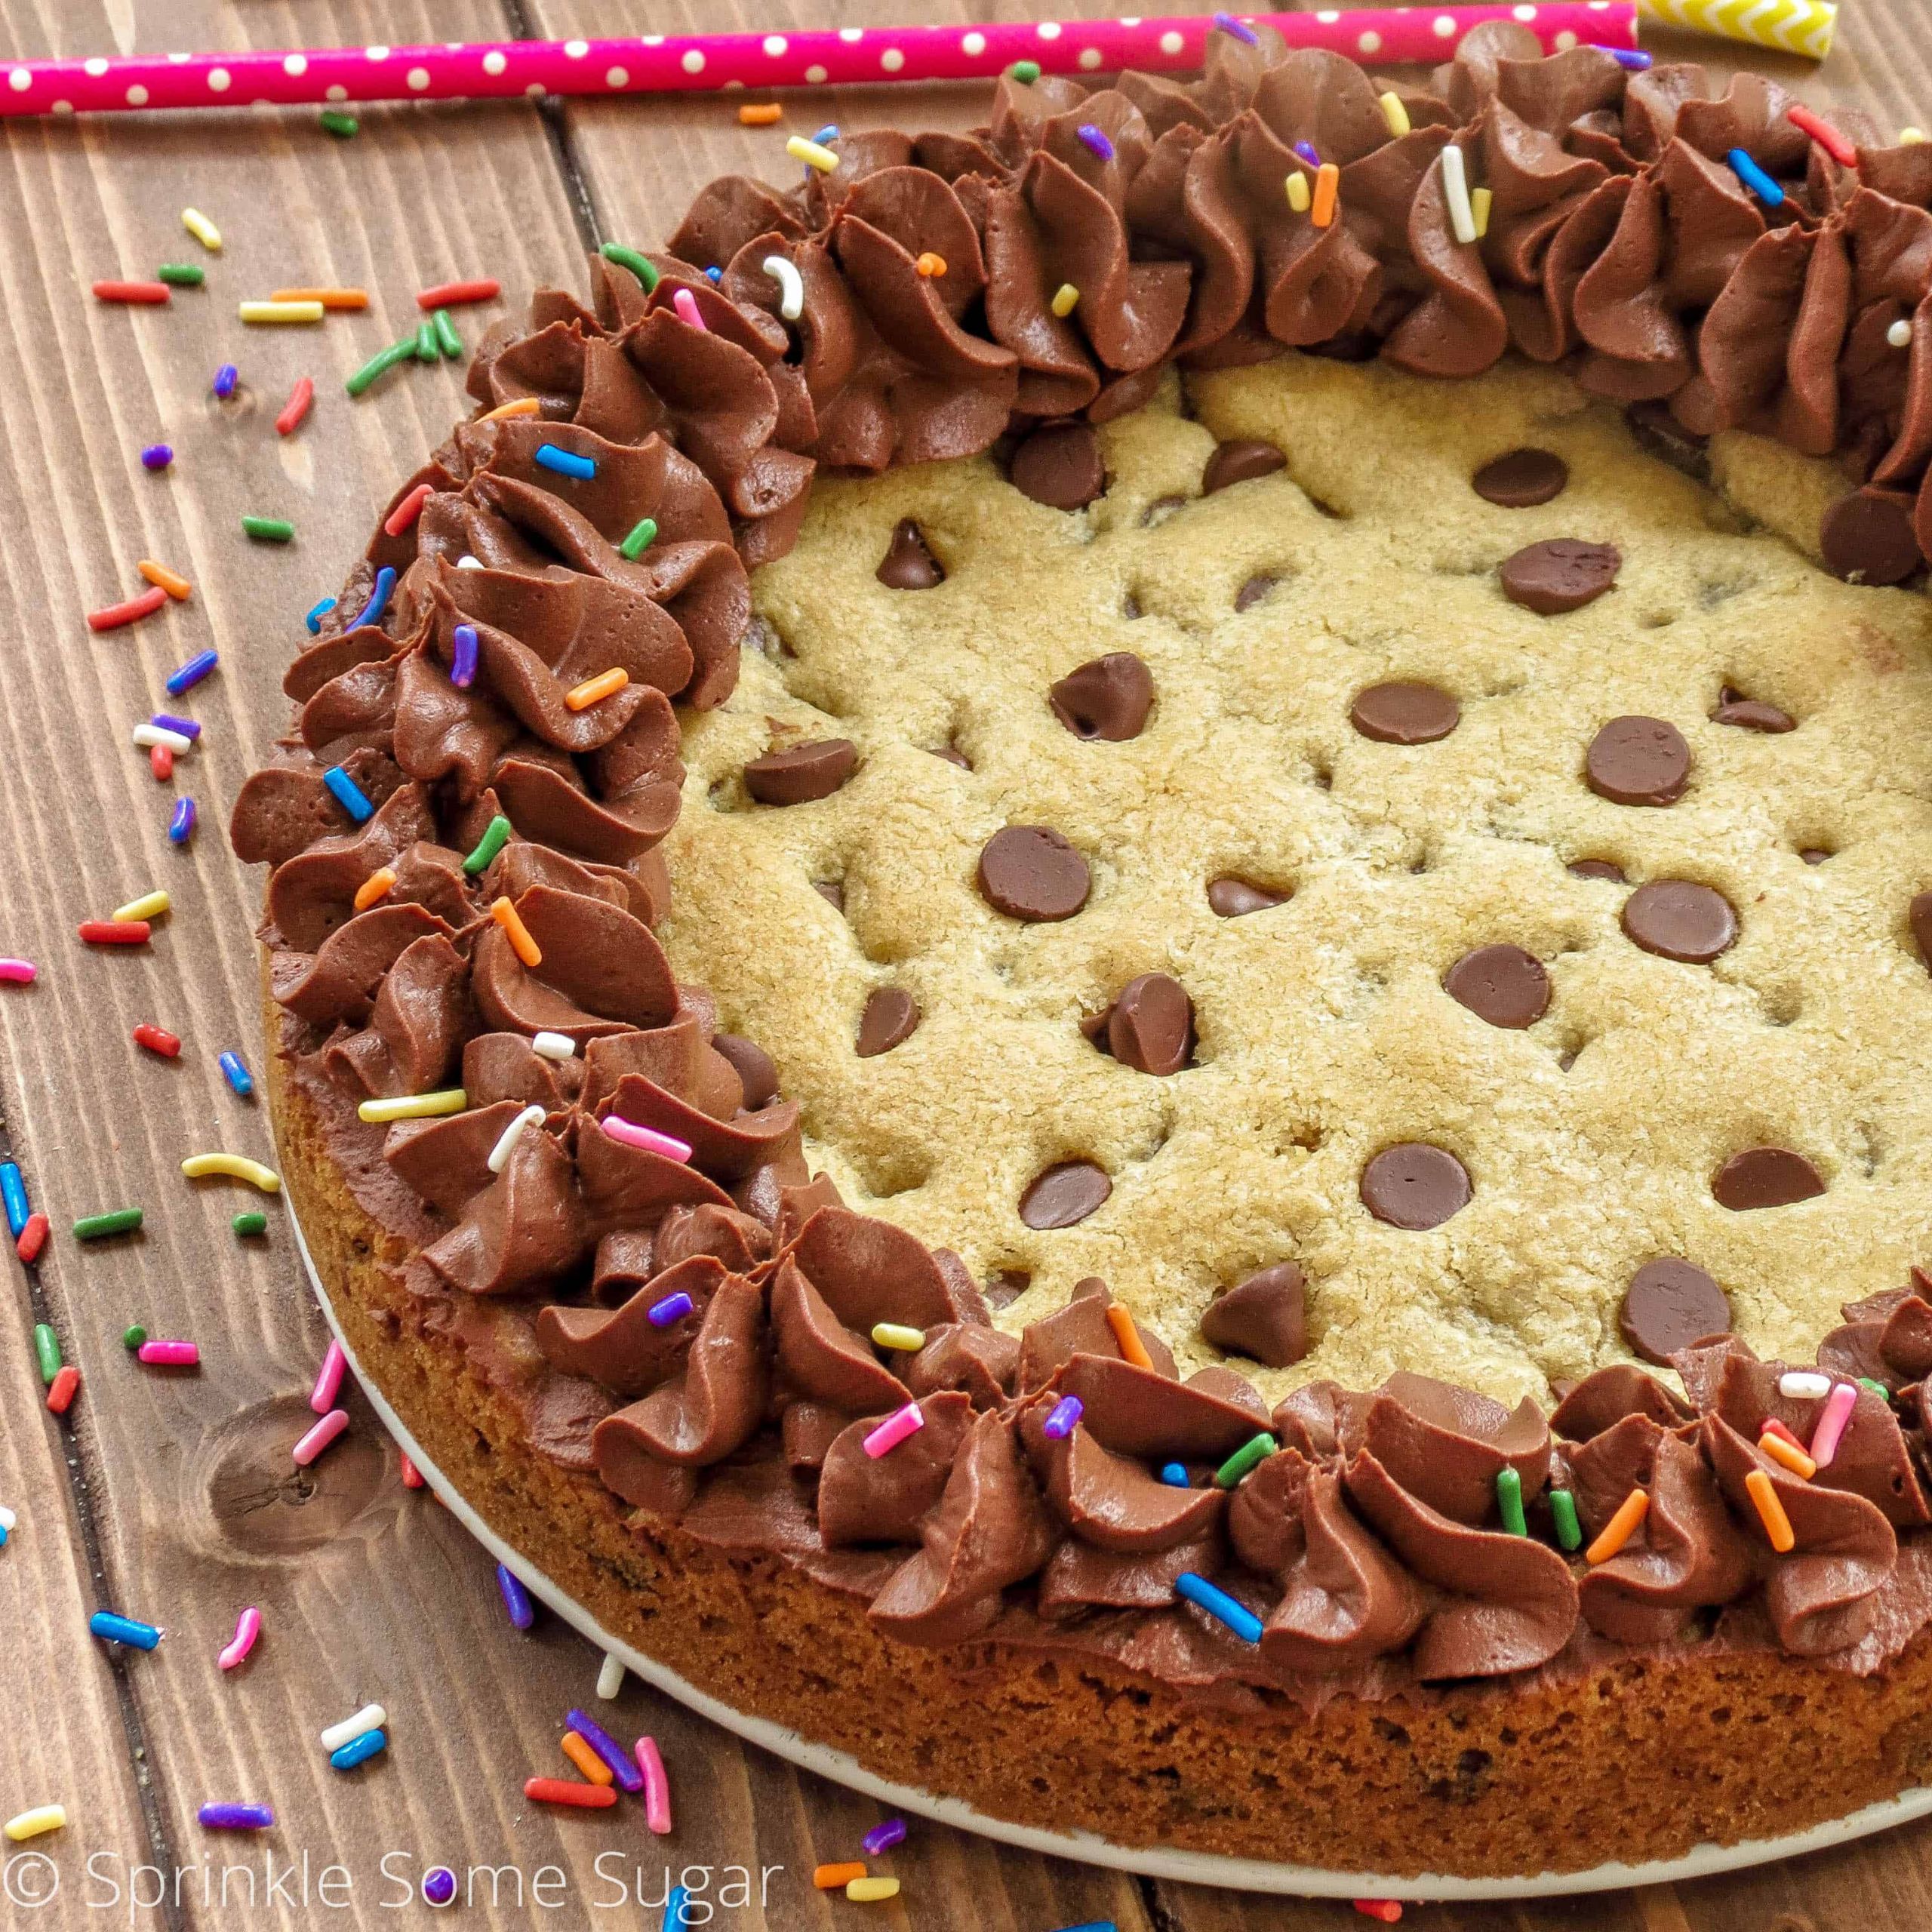 Chocolate Chip Cake Cookies Unique the Best Chocolate Chip Cookie Cake Sprinkle some Sugar